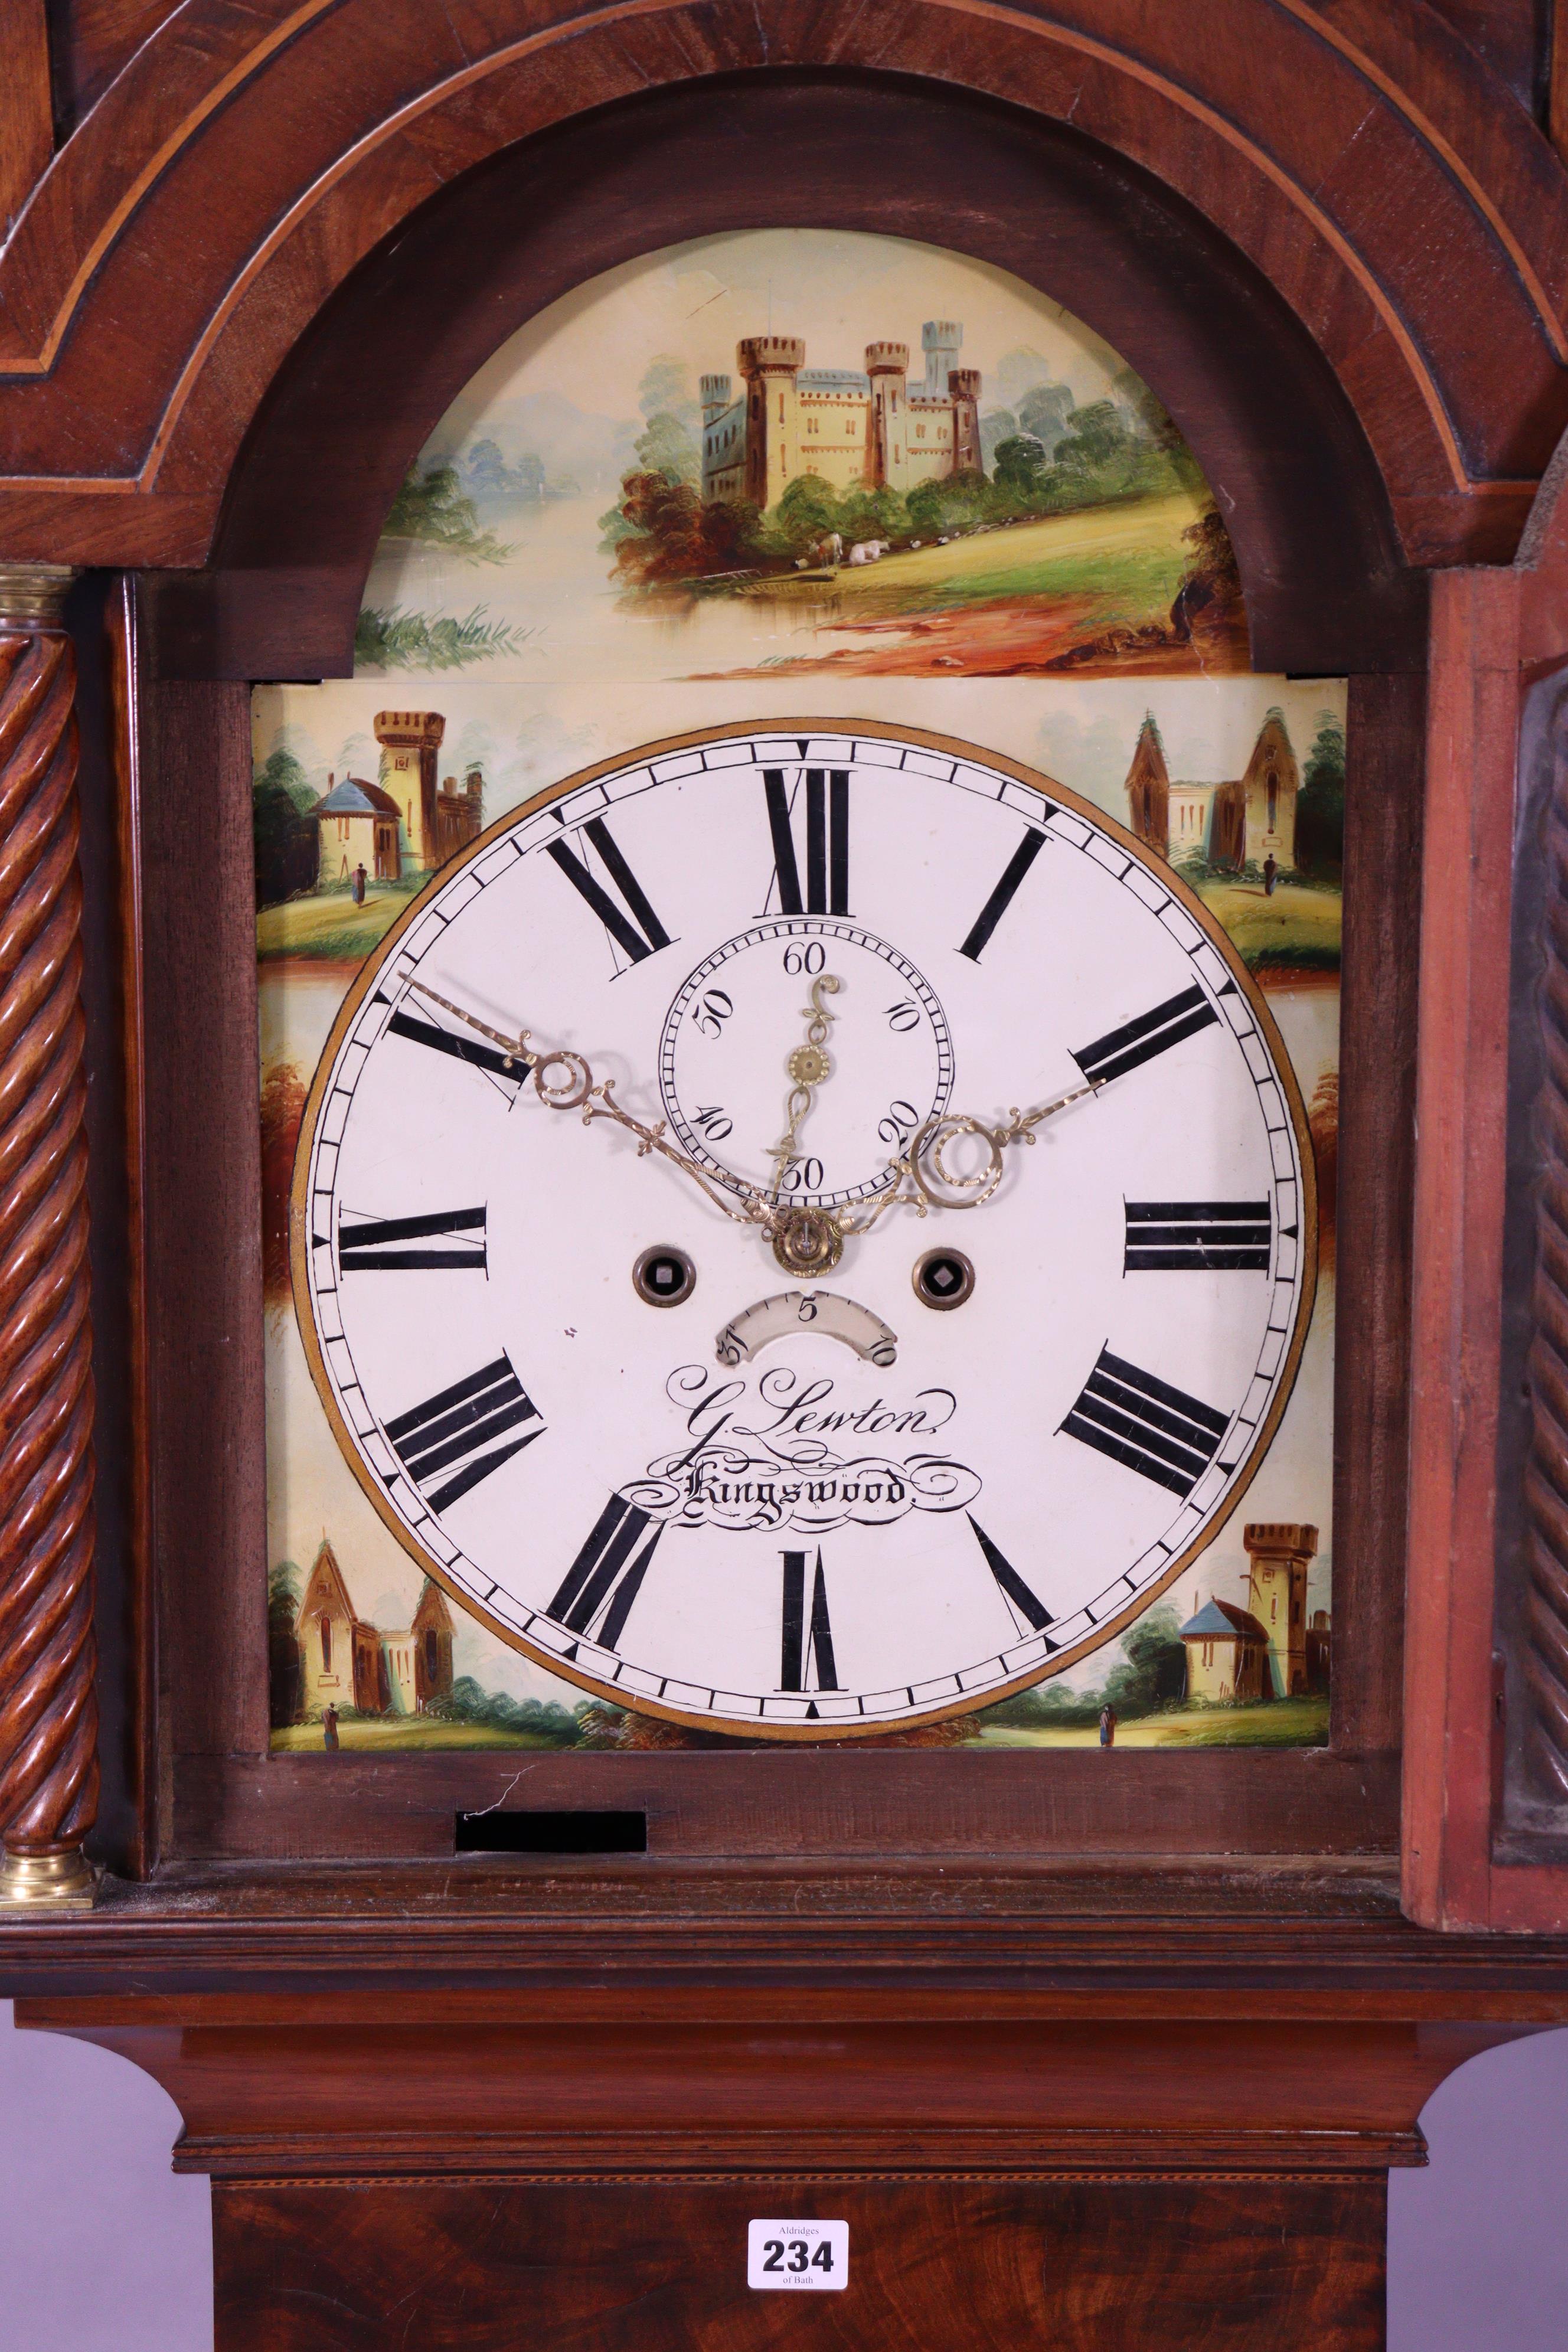 A 19th century longcase clock, the 12” painted dial signed “G. Lewton, Kingswood” with castle & - Image 2 of 5